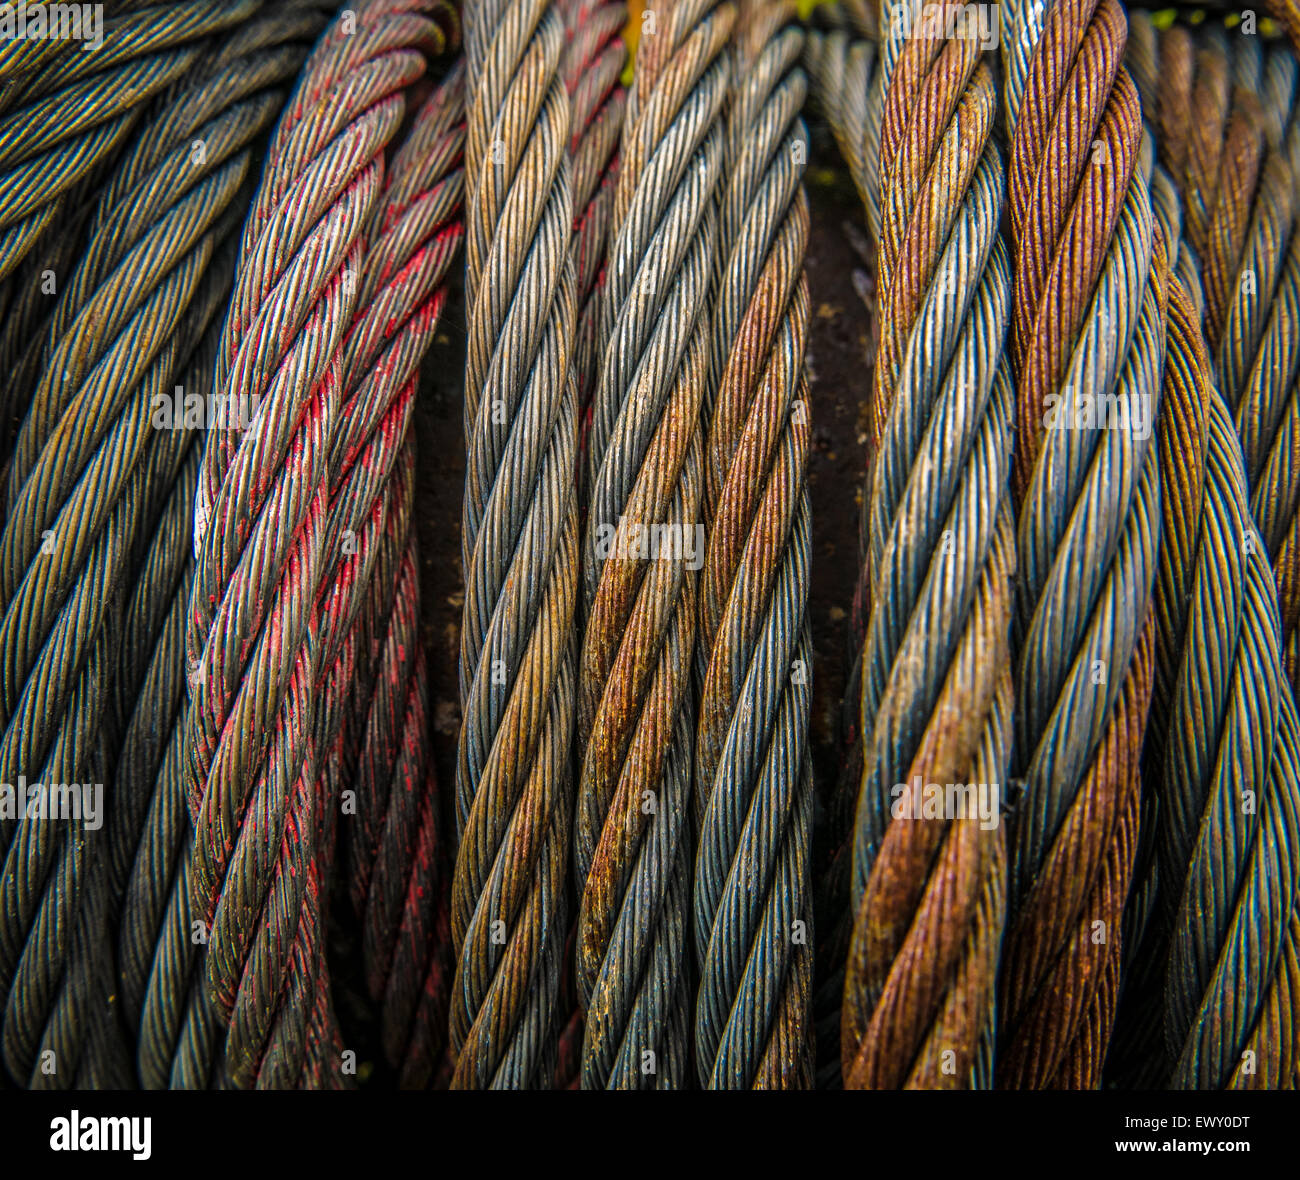 Background Texture Of Some Heavy Duty Industrial Metal Cables Or Rope Stock Photo